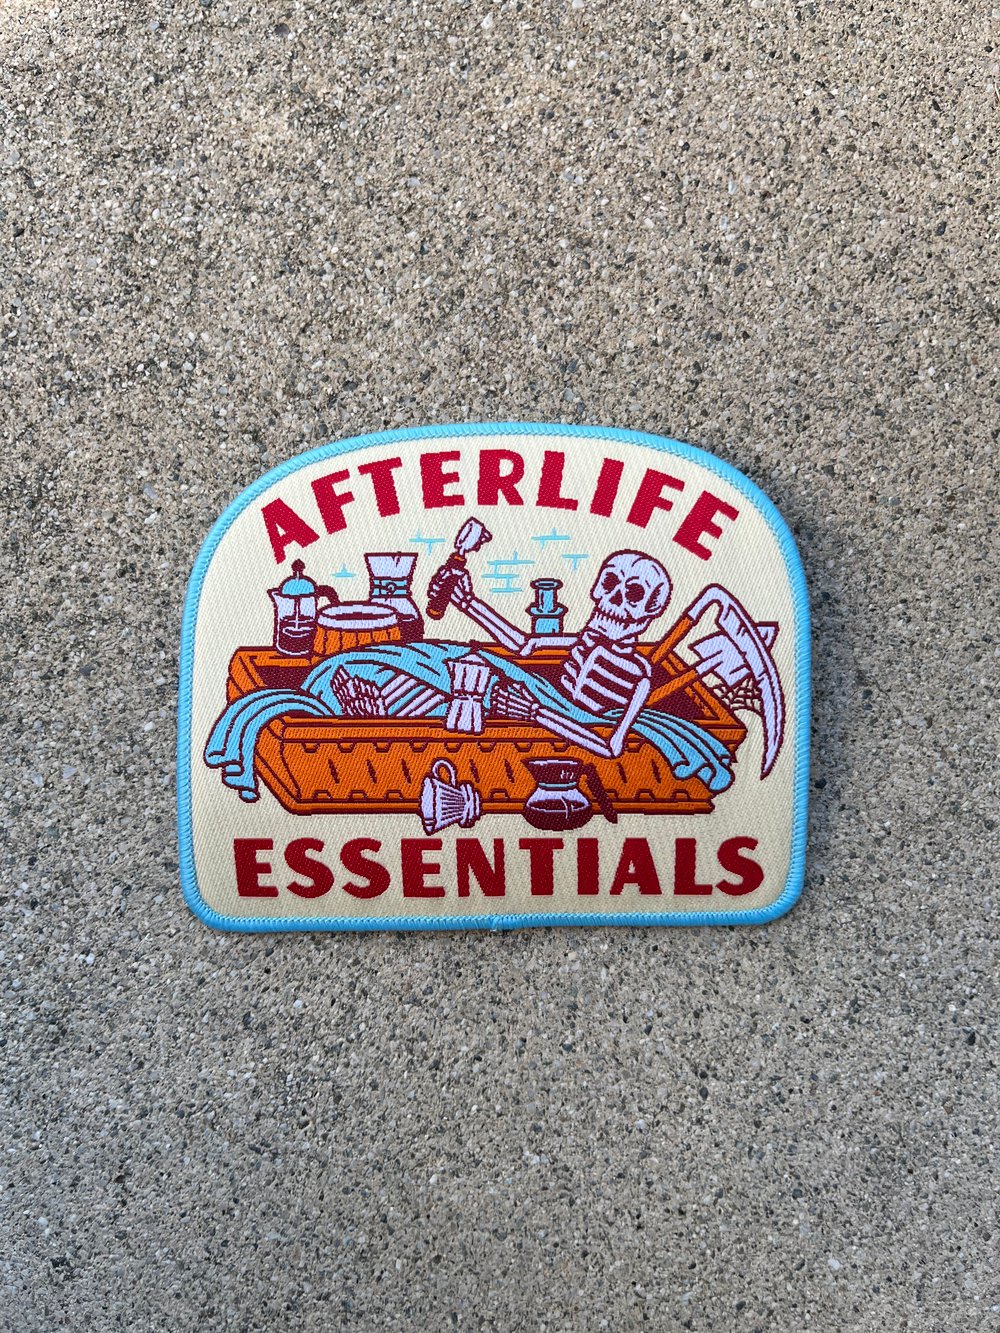 RR#138 After Life Essentials Patch by DeathByCoffee666